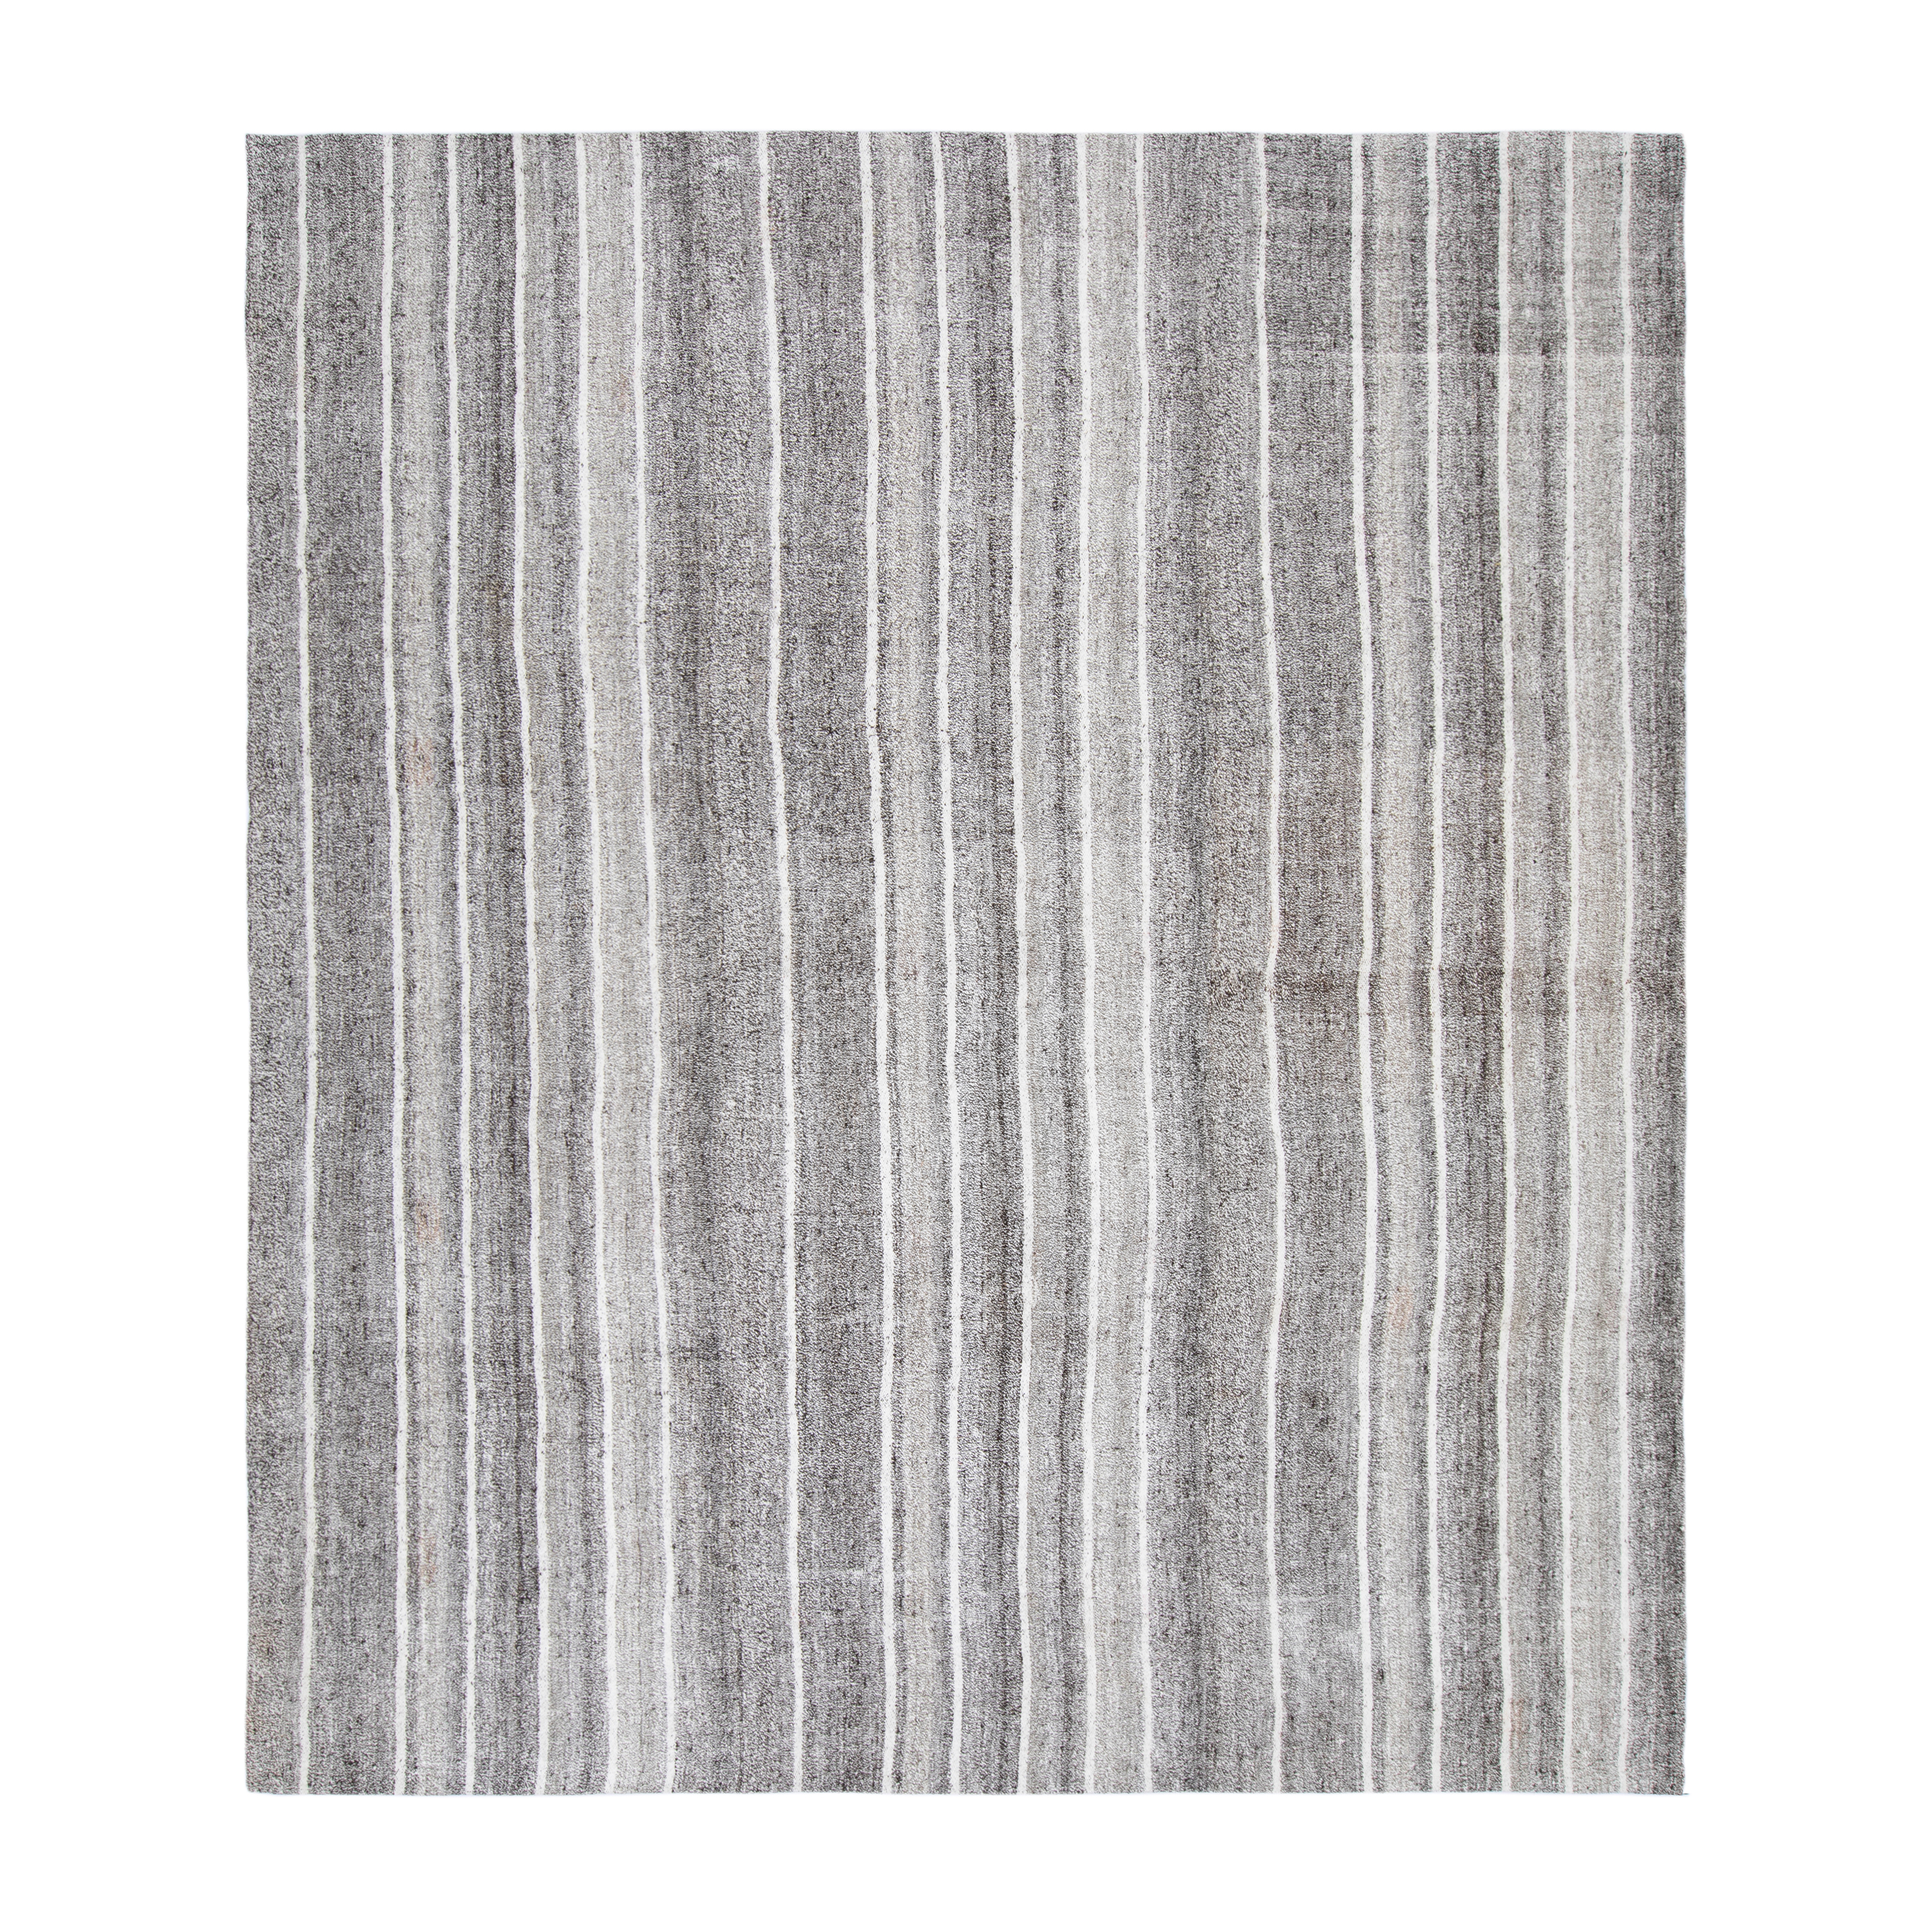 This Stripe Rug is hand-woven and made of wool.